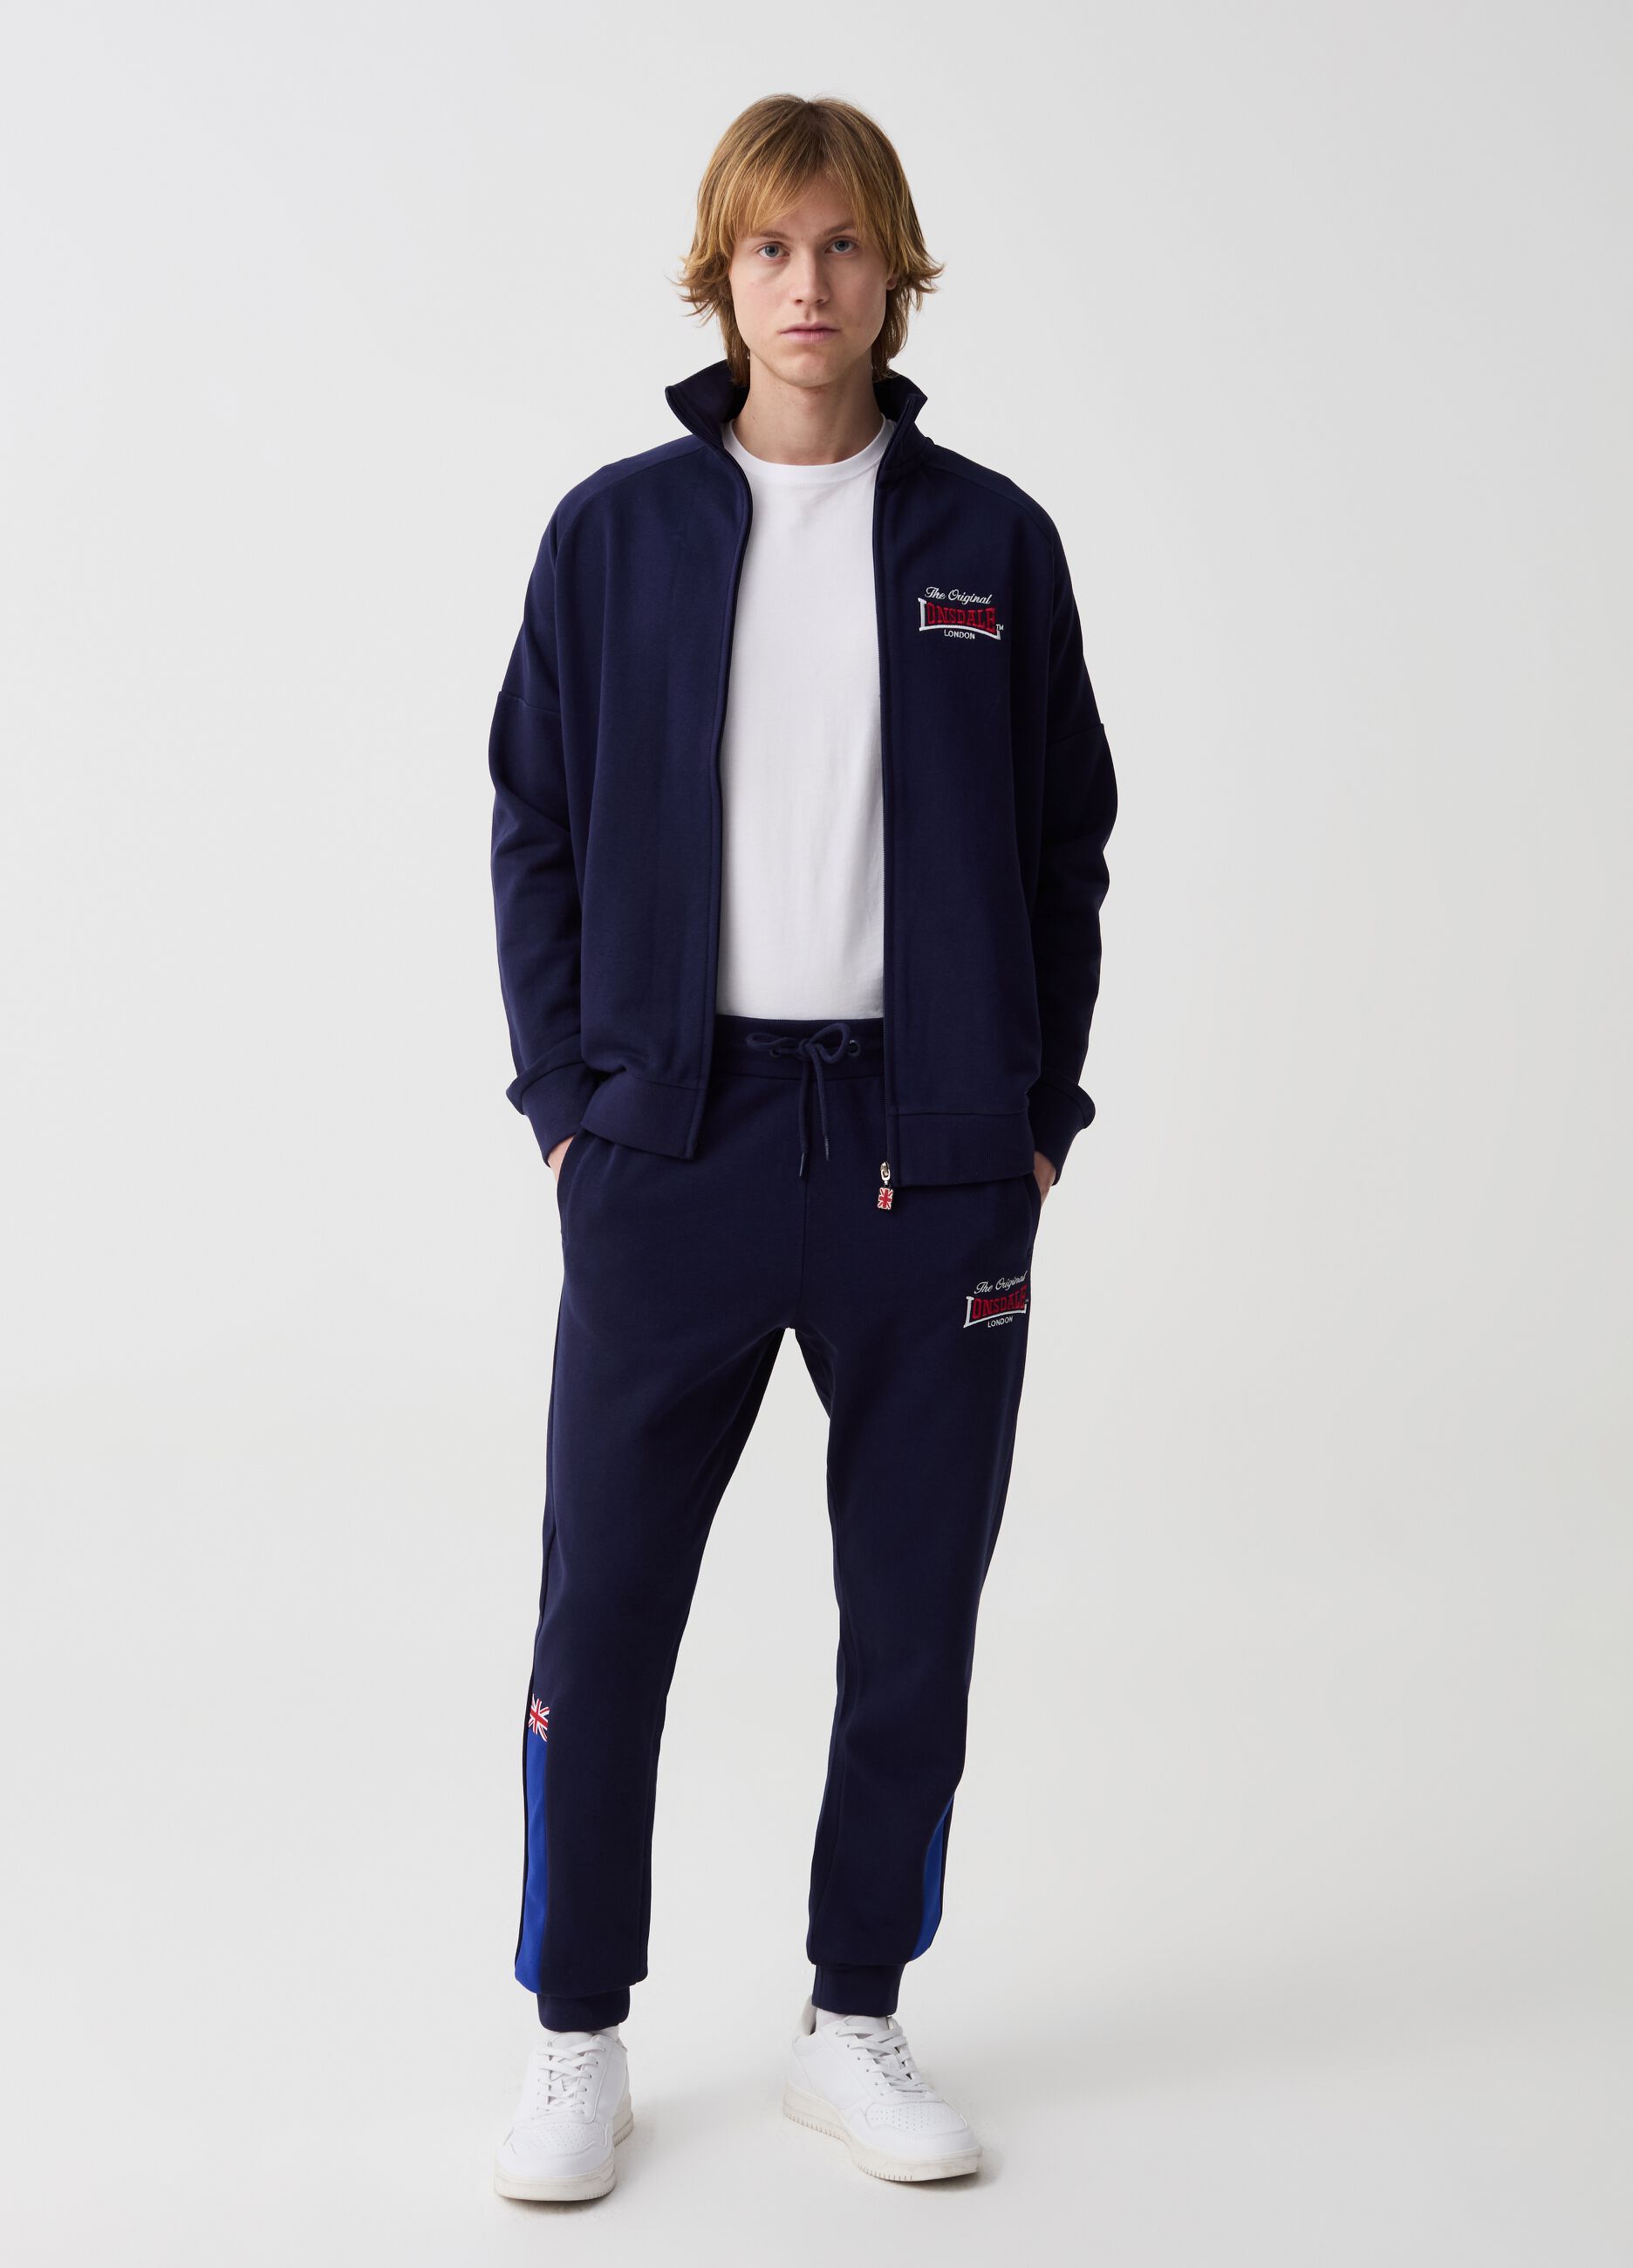 Joggers with logo embroidery and contrasting inserts